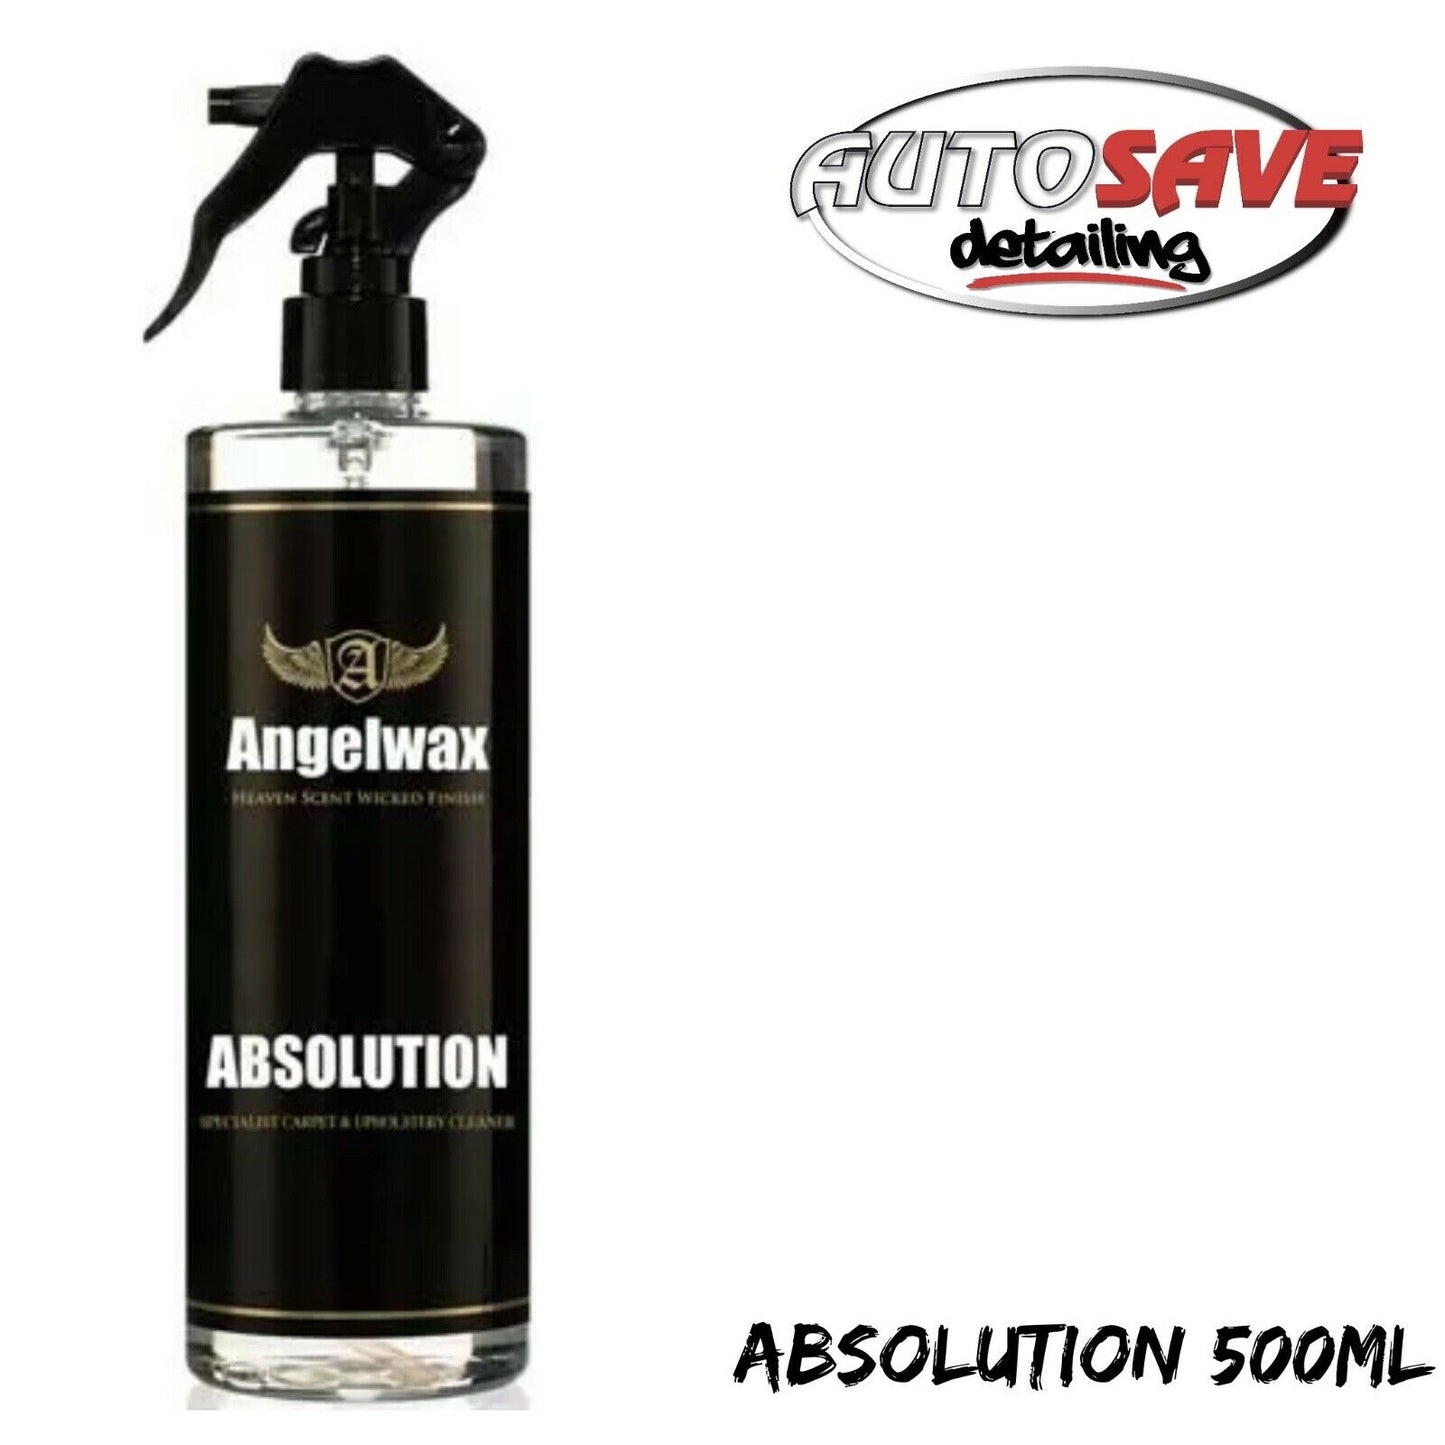 Angelwax Absolution 500ml, Carpet & Upholstery Cleaner